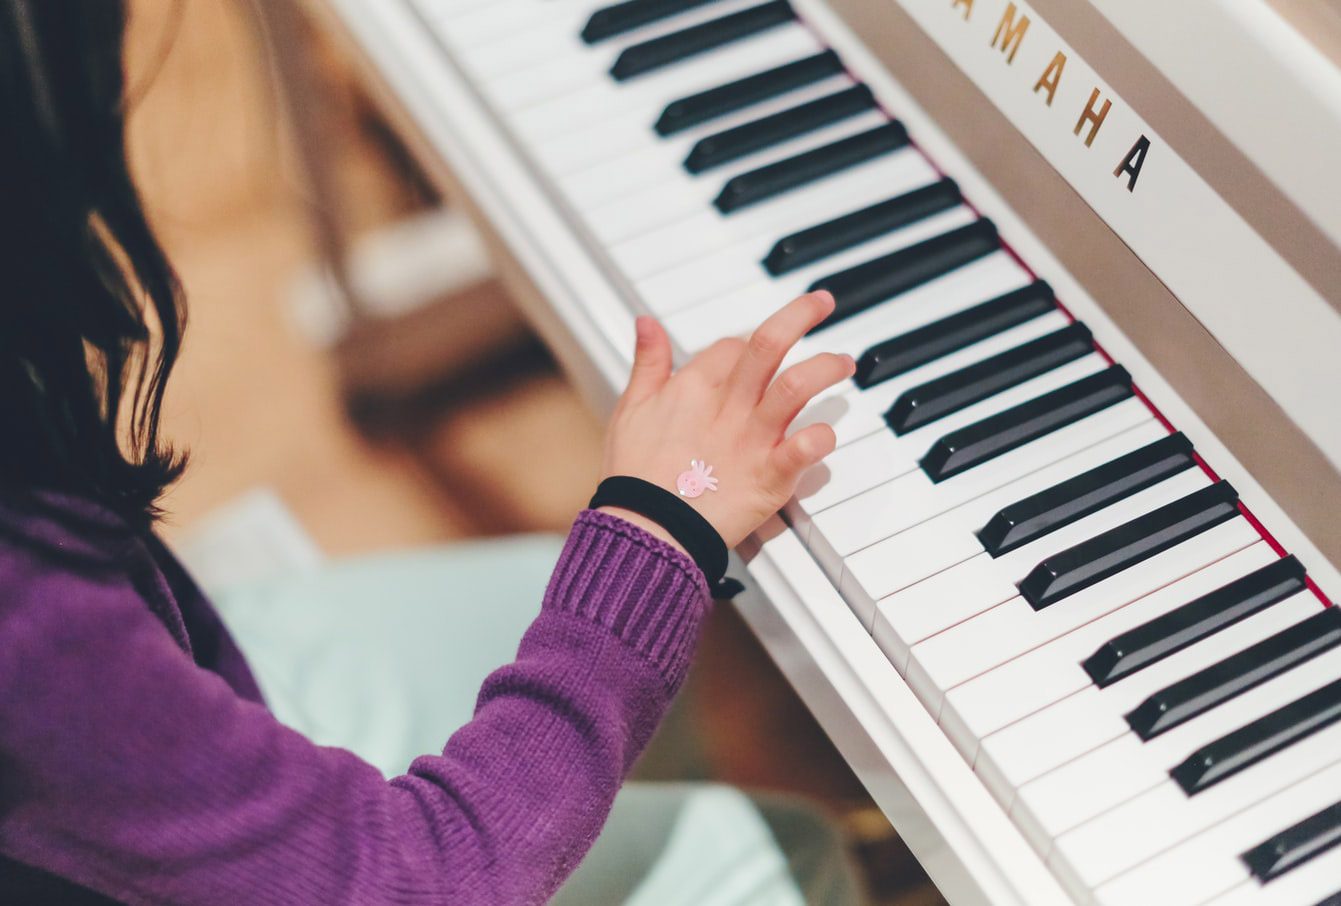 Why should kids learn to play music?